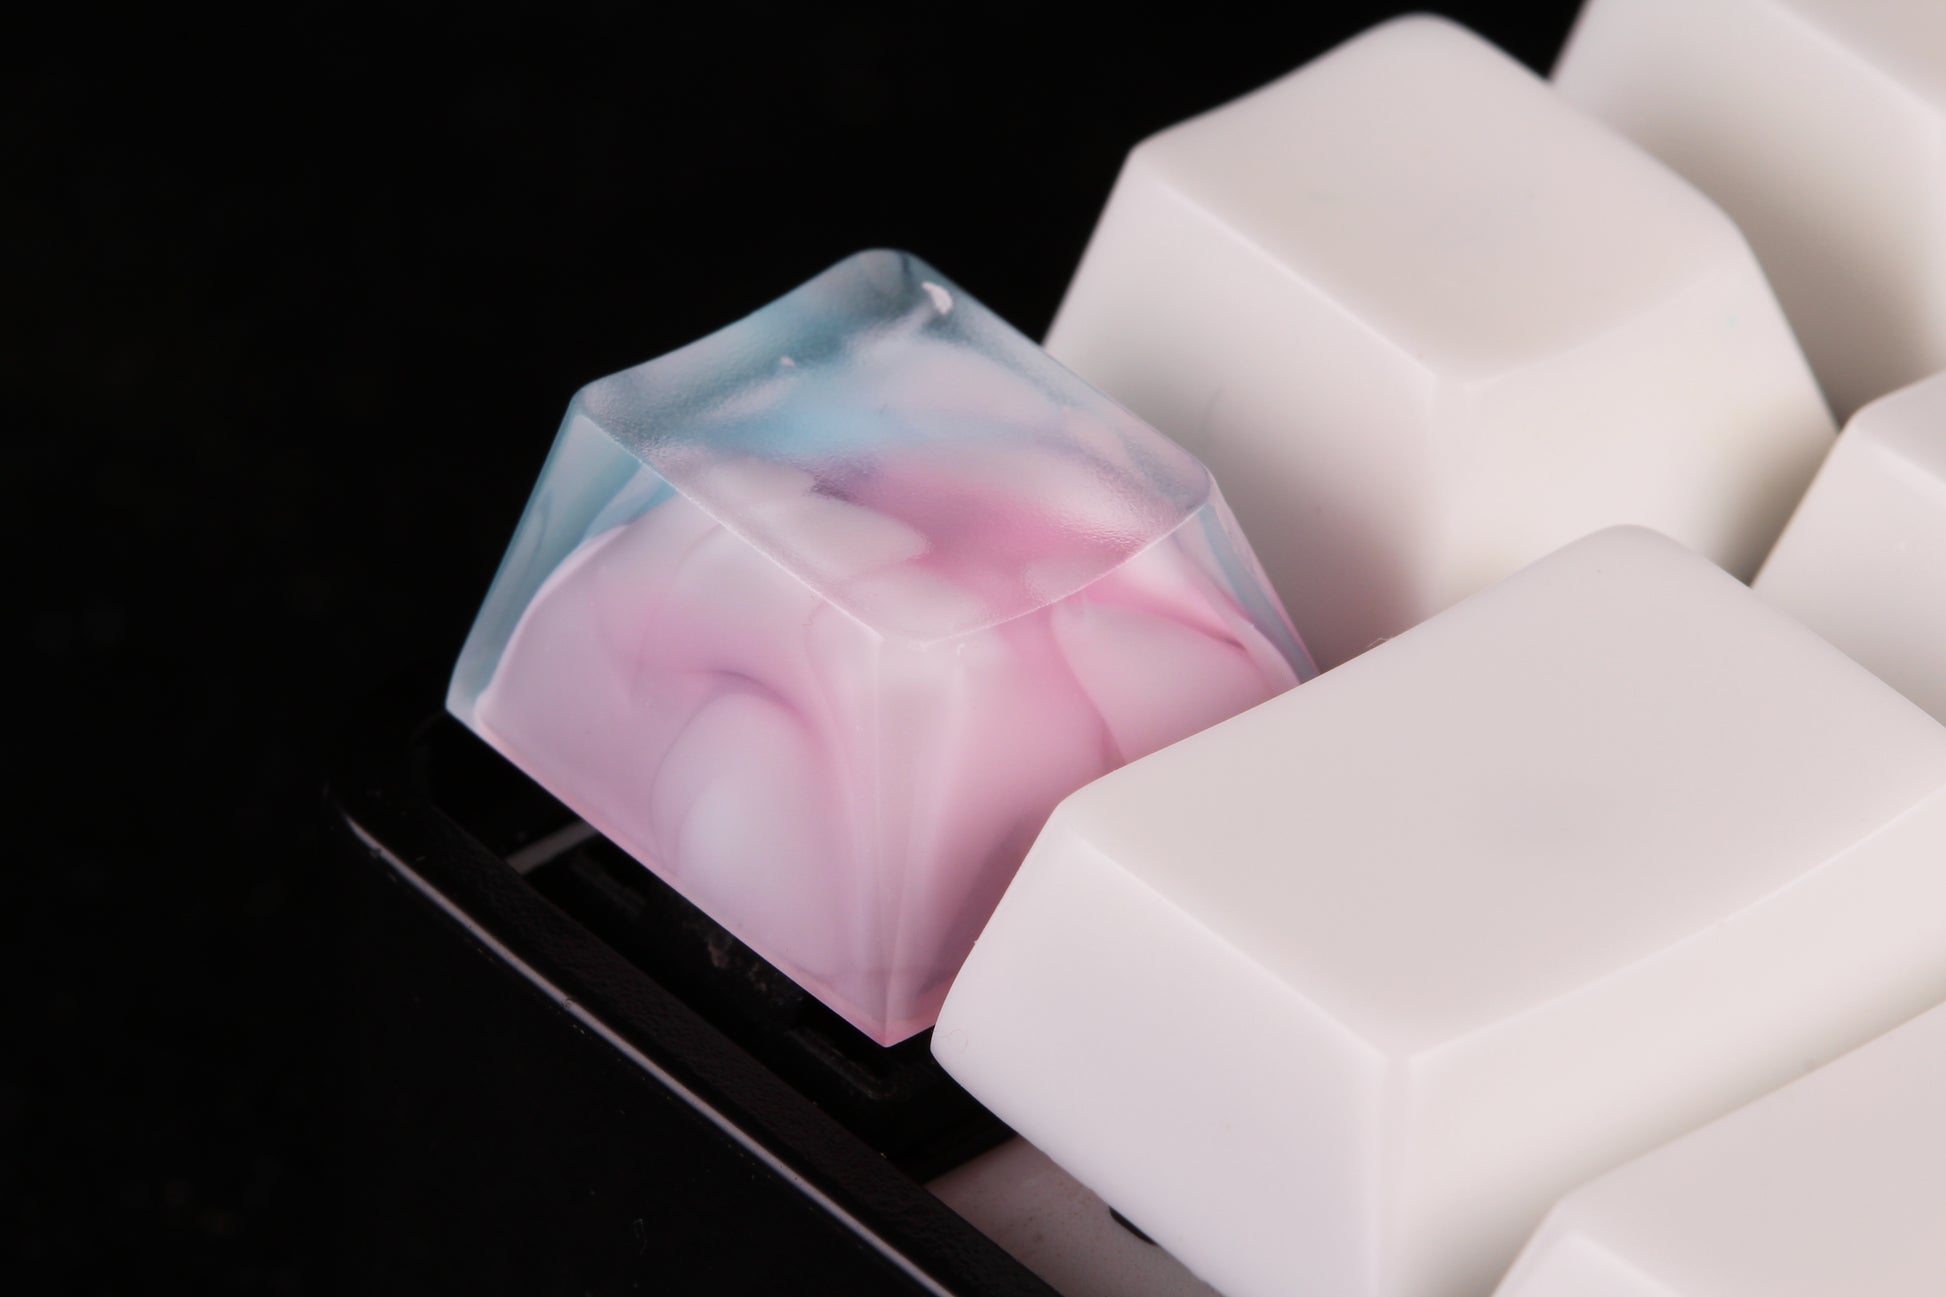 GMK Cherry Profile Cloud Chaser - Jr. McFly Row 1 - 3 - PrimeCaps Keycap - Blank and Sculpted Artisan Keycaps for cherry MX mechanical keyboards 